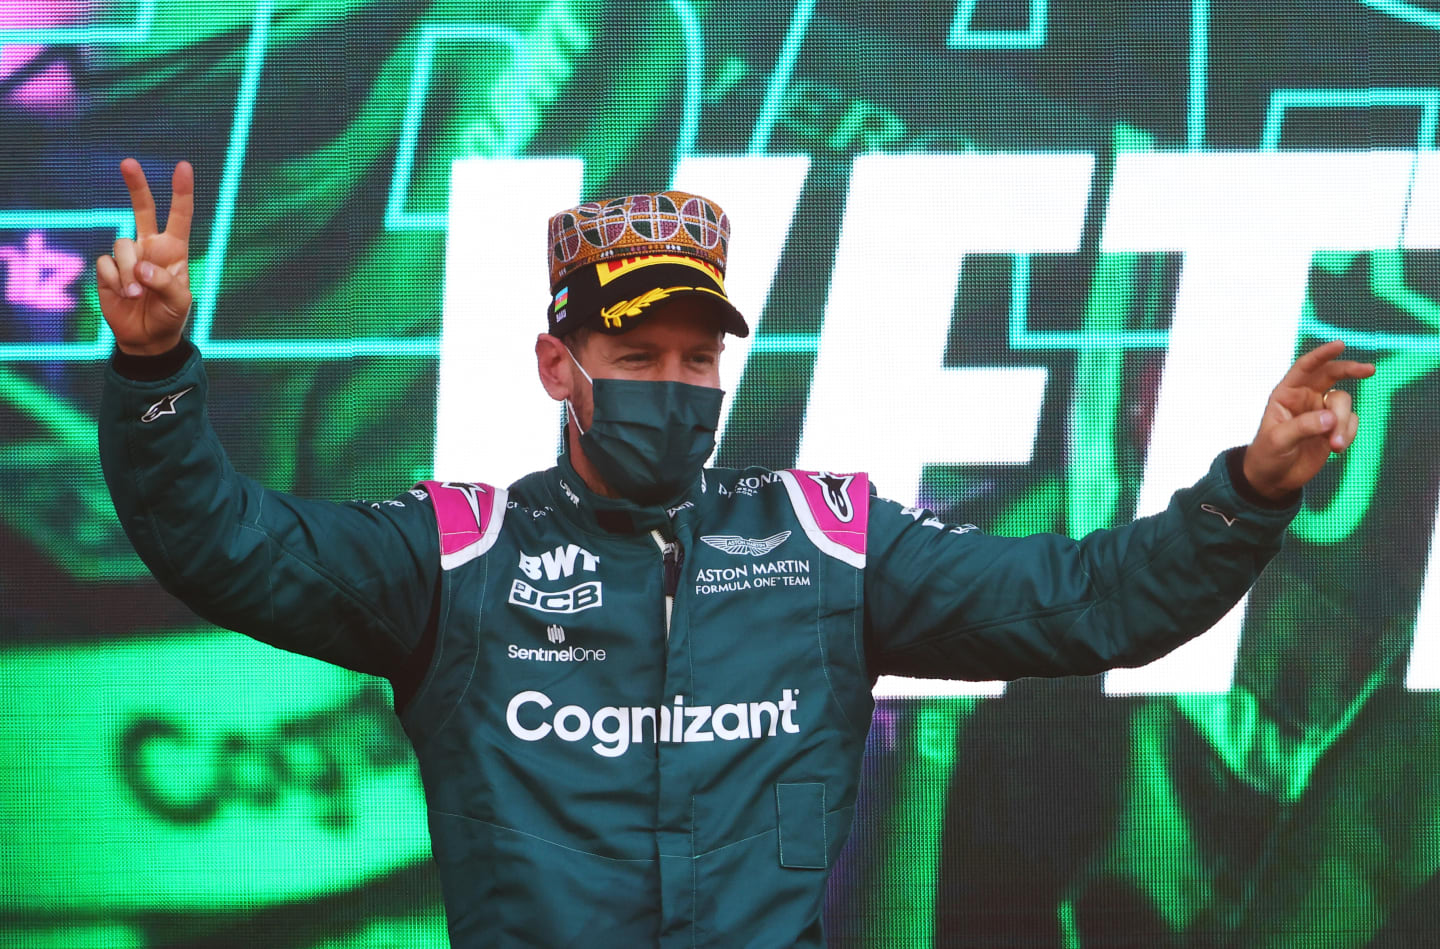 BAKU, AZERBAIJAN - JUNE 06: Second placed Sebastian Vettel of Germany and Aston Martin F1 Team celebrates on the podium during the F1 Grand Prix of Azerbaijan at Baku City Circuit on June 06, 2021 in Baku, Azerbaijan. (Photo by Francois Nel/Getty Images)